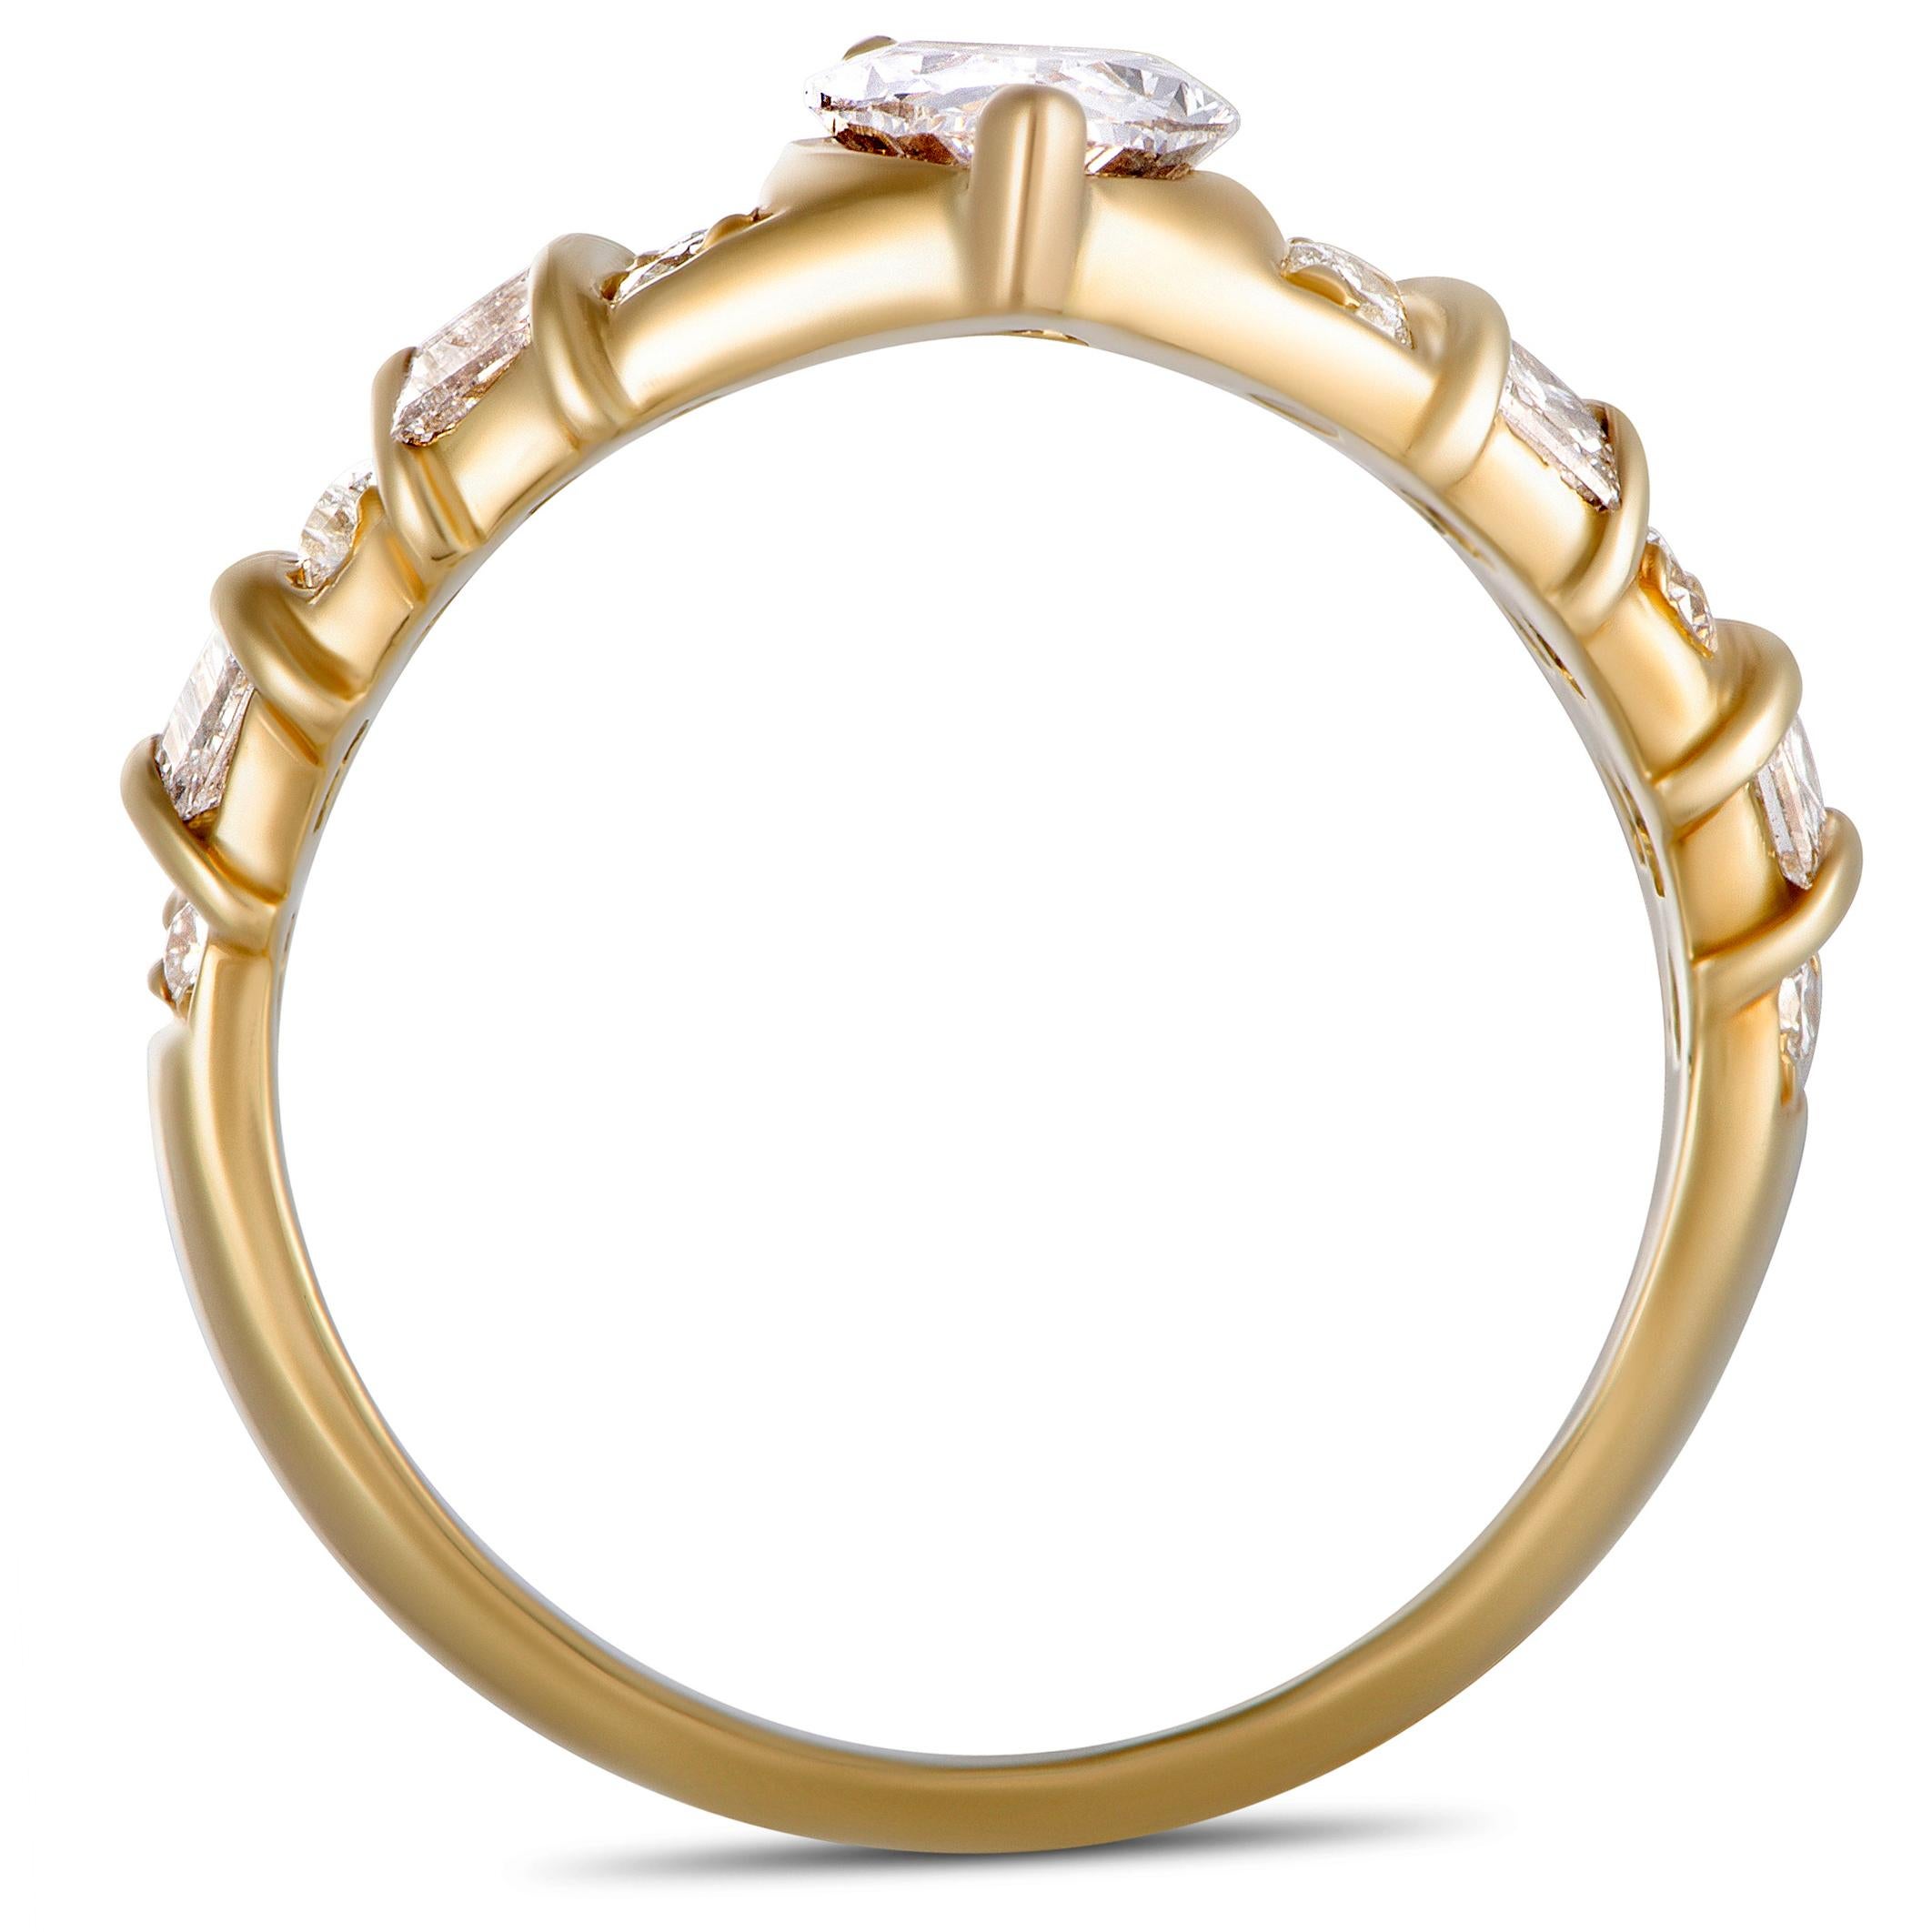 This Graff ring is made out of 18K yellow gold and diamonds and weighs 5.2 grams. The center diamond weighs approximately 0.72 carats and boasts grade G color and VS1 clarity, while the side diamonds total 1.00 carat. The ring features band